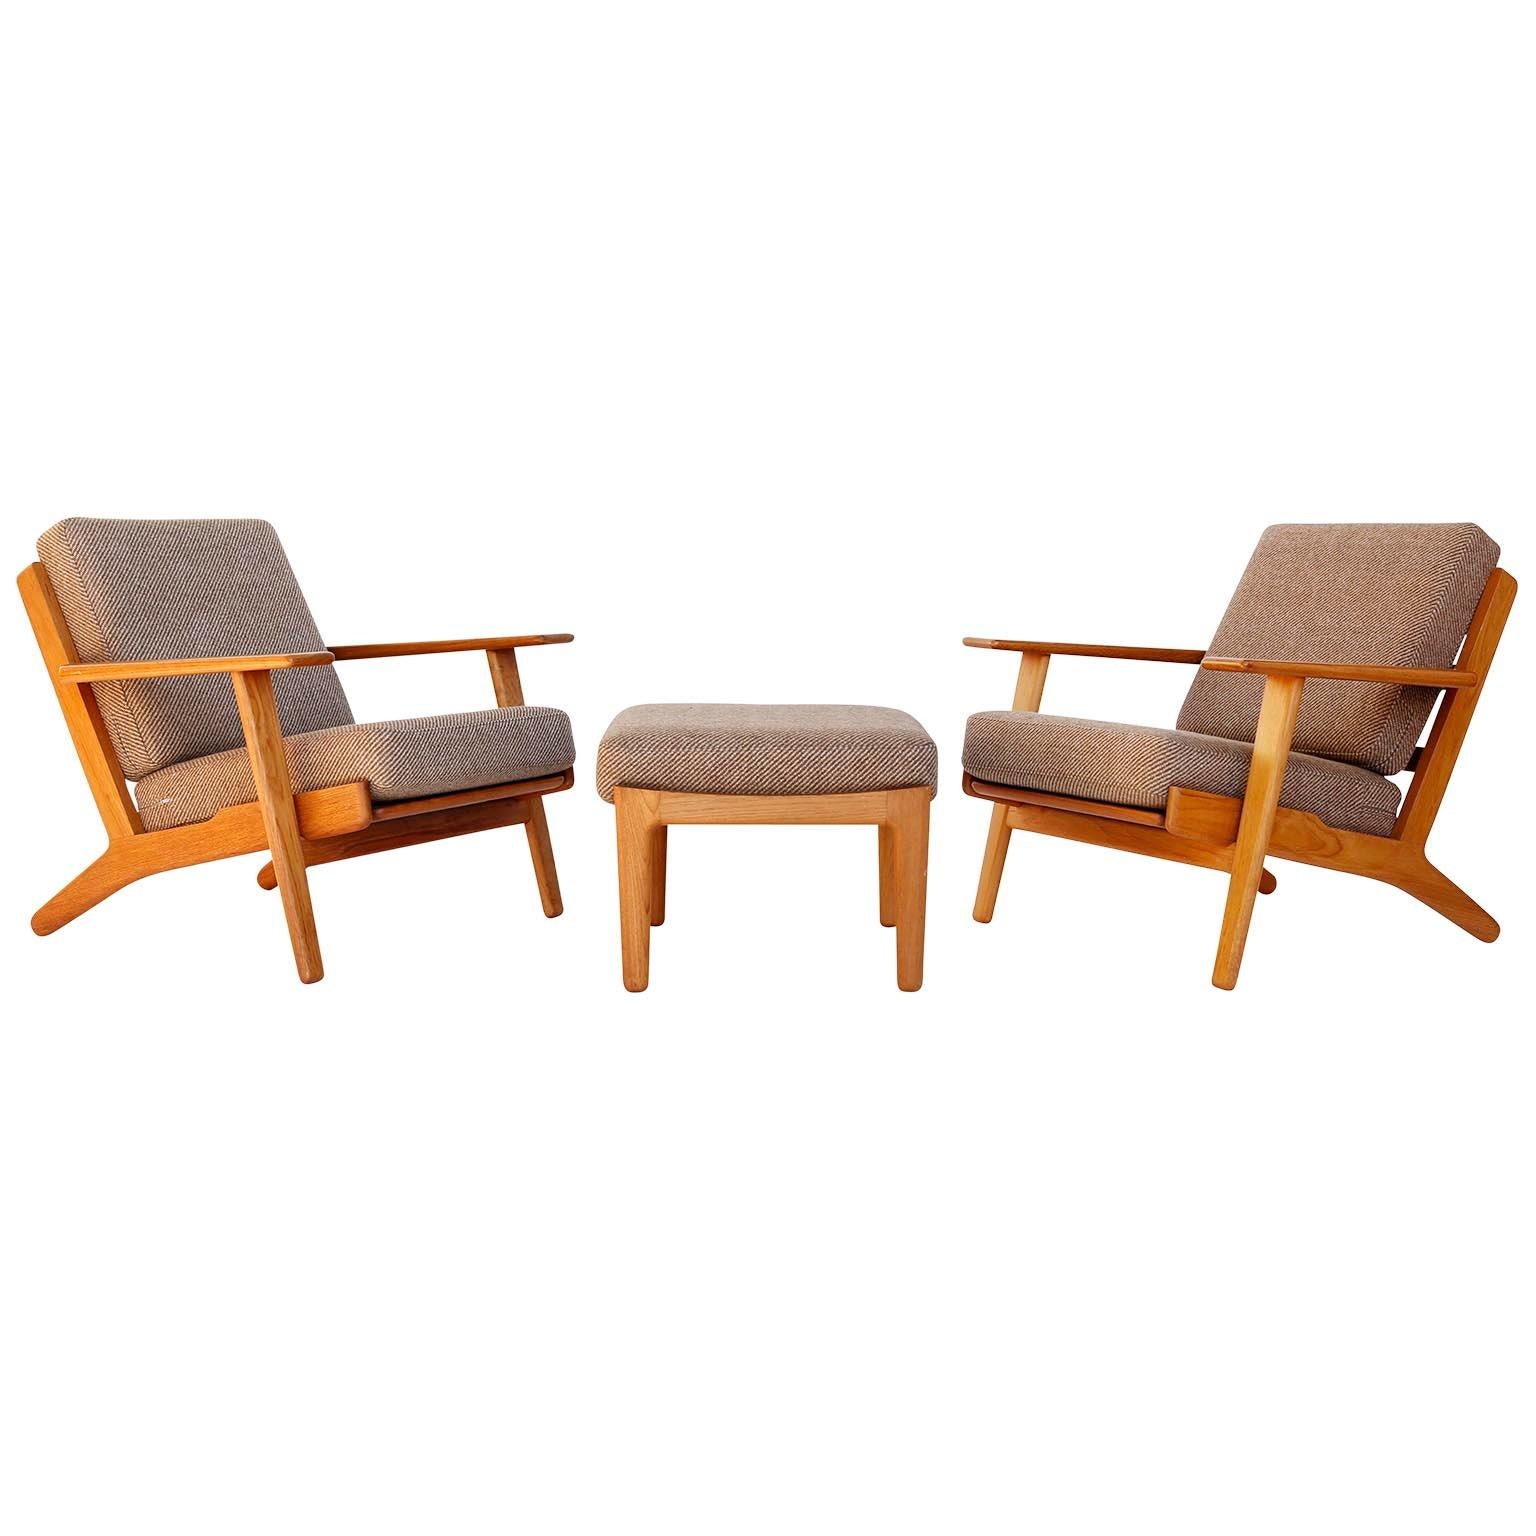 A pair of Danish modern easy chairs model GE-290 and ottoman designed by Hans Wegner for GETAMA, manufactured in midcentury in 1950s.
The armchairs are made of teak and loose cushions which are covered with a high quality fabric with brown and cream